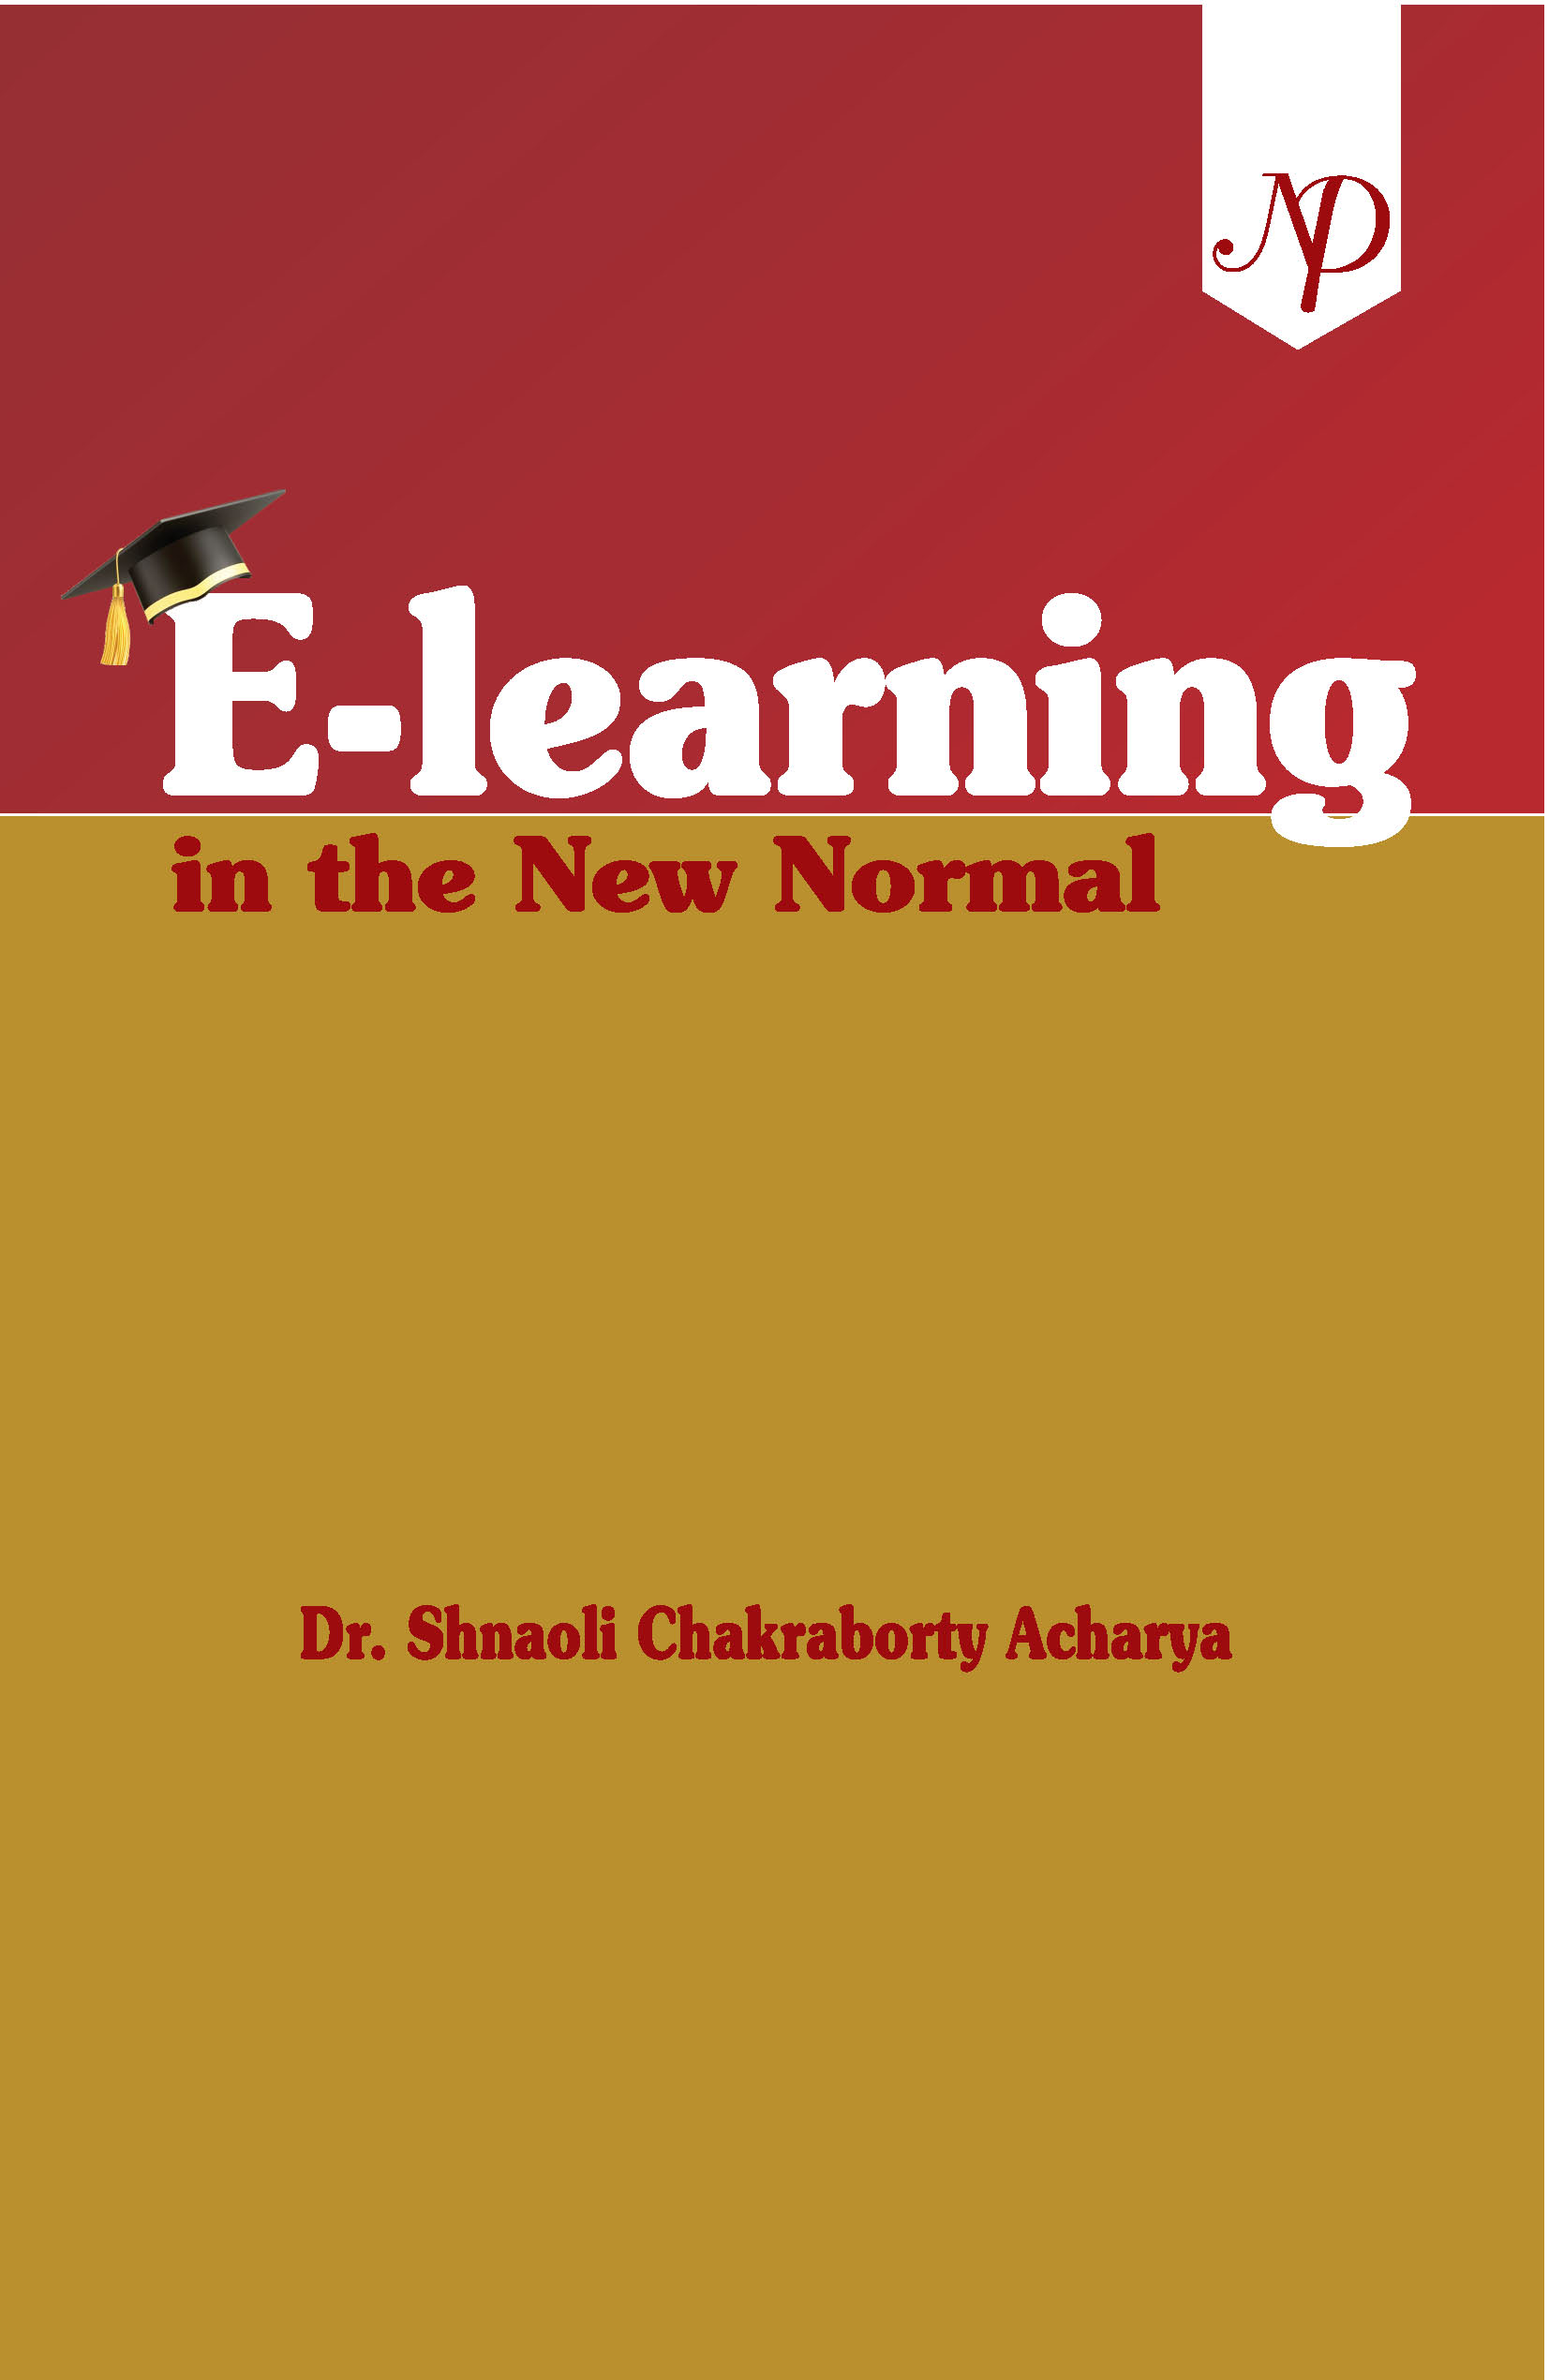 E-Learning in the New Normal